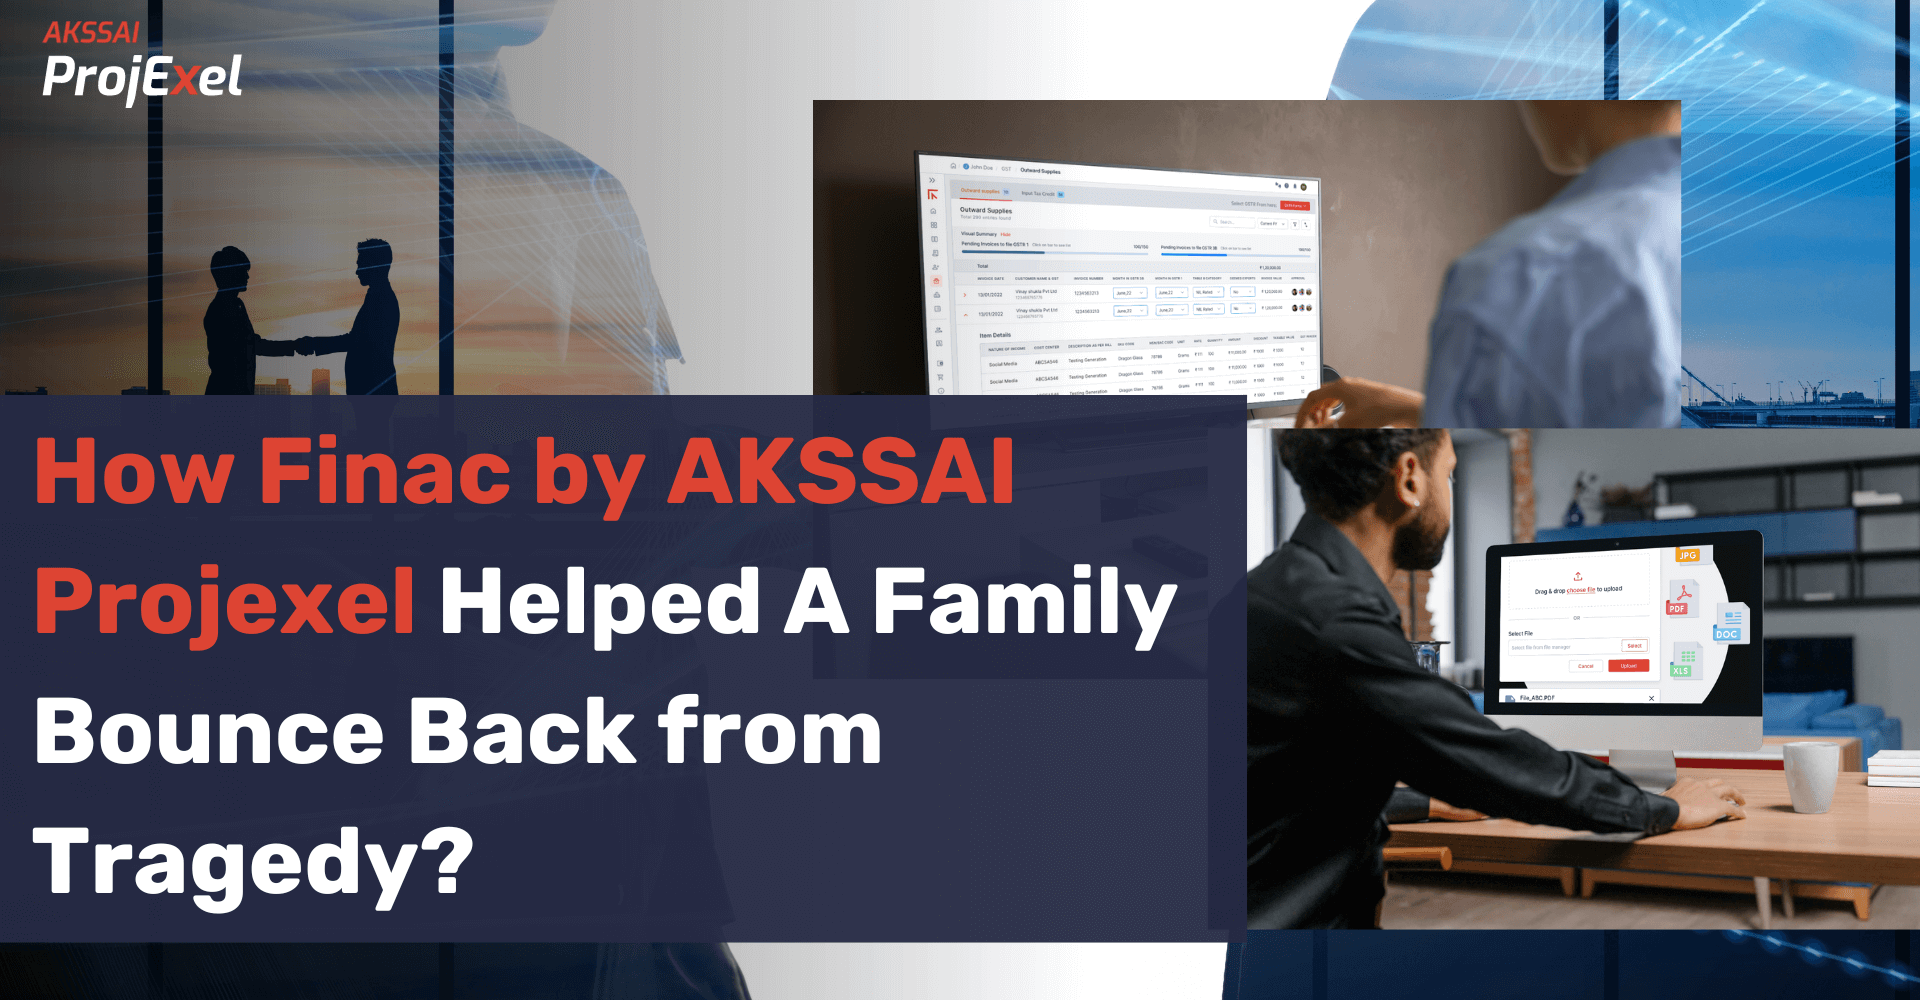 Finac by AKSSAI Projexel Helps Your Family Bounce Back from Tragedy